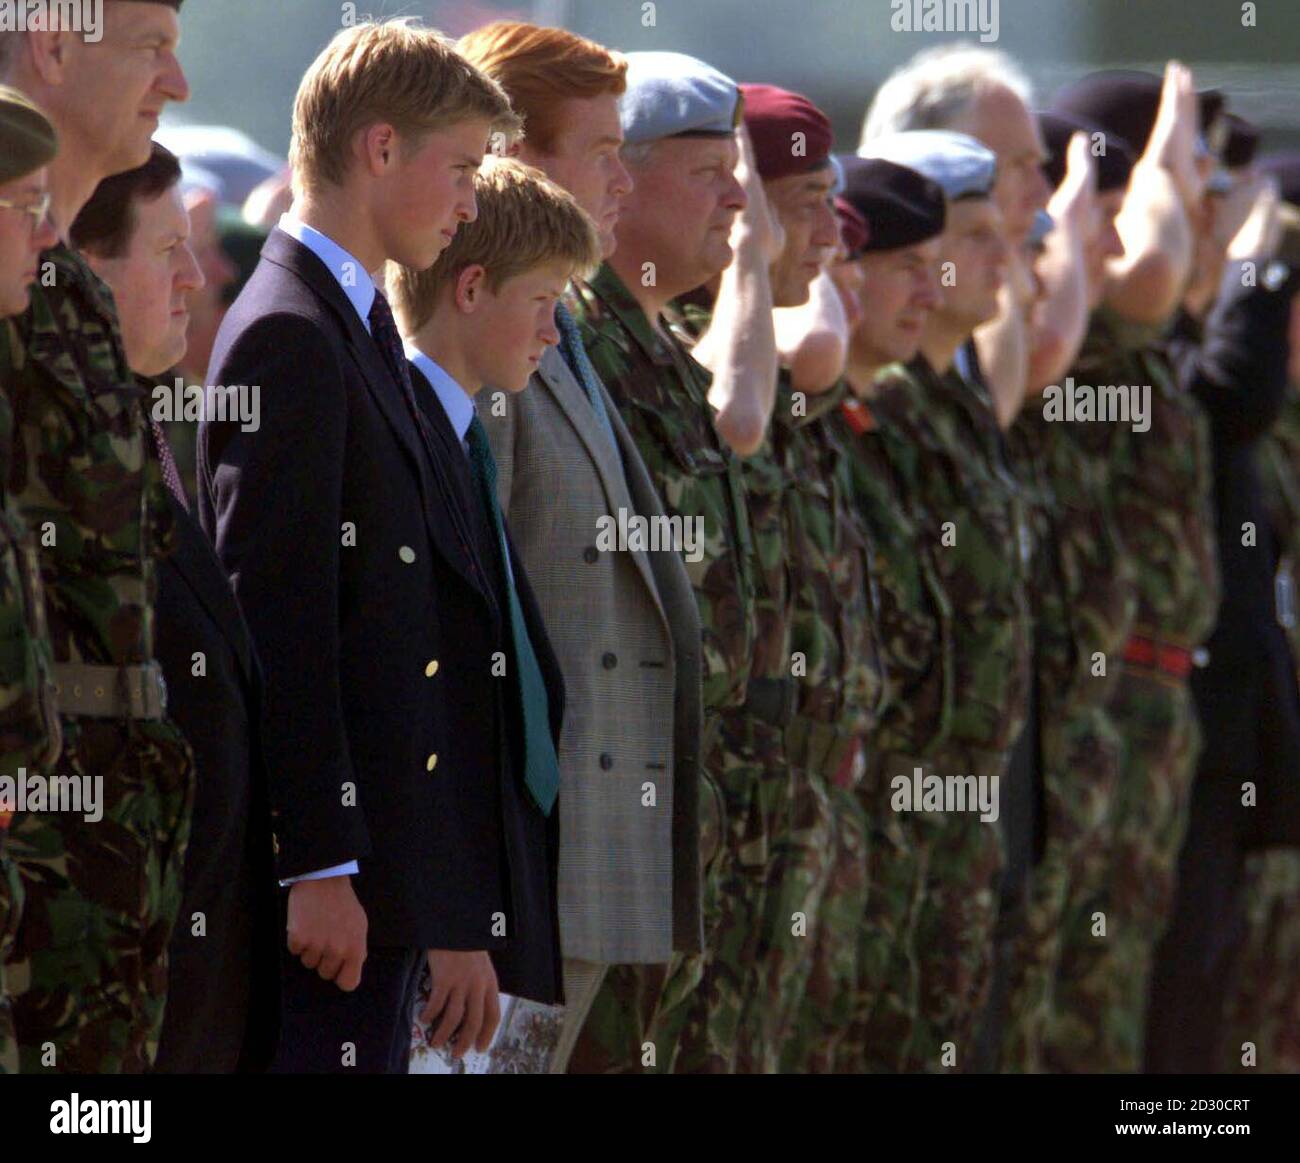 Prince William (left, gold buttons) and his brother Prince Harry (to the right of Prince William) at RAF Wattisham in Suffolk, on the day that the report into the death of their mother, Princess Diana, was published in France. Stock Photo